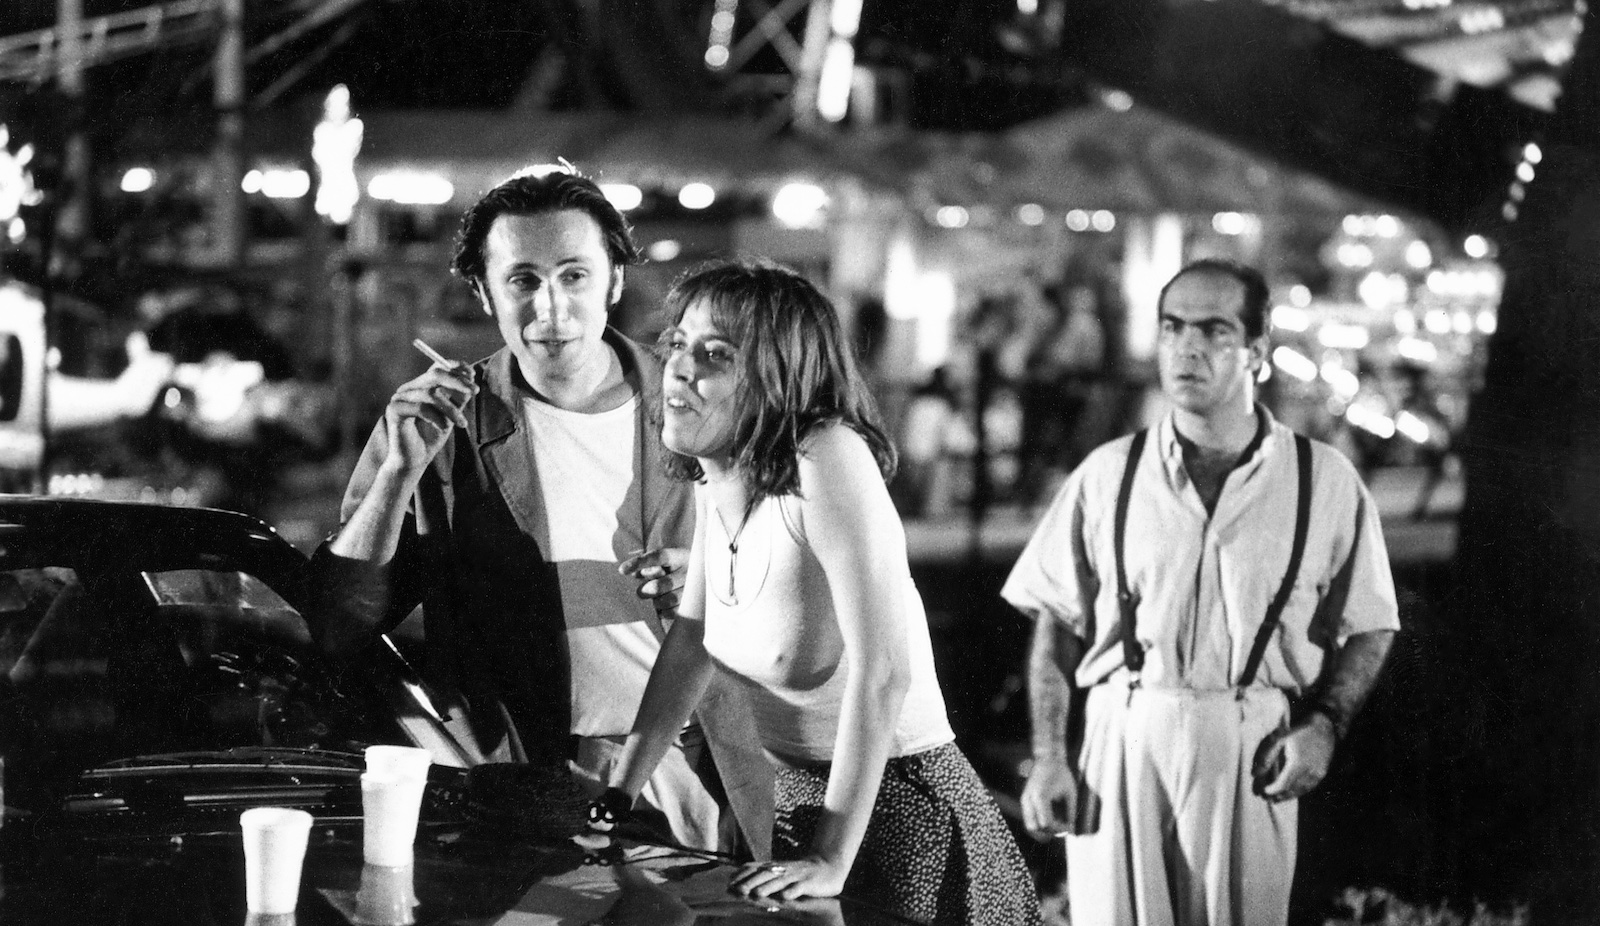 Three people stand by a car in an outdoor carnival, a woman leaning against the car hood and a man holding a cigarette talking to her, while another man stands behind them and looks at them